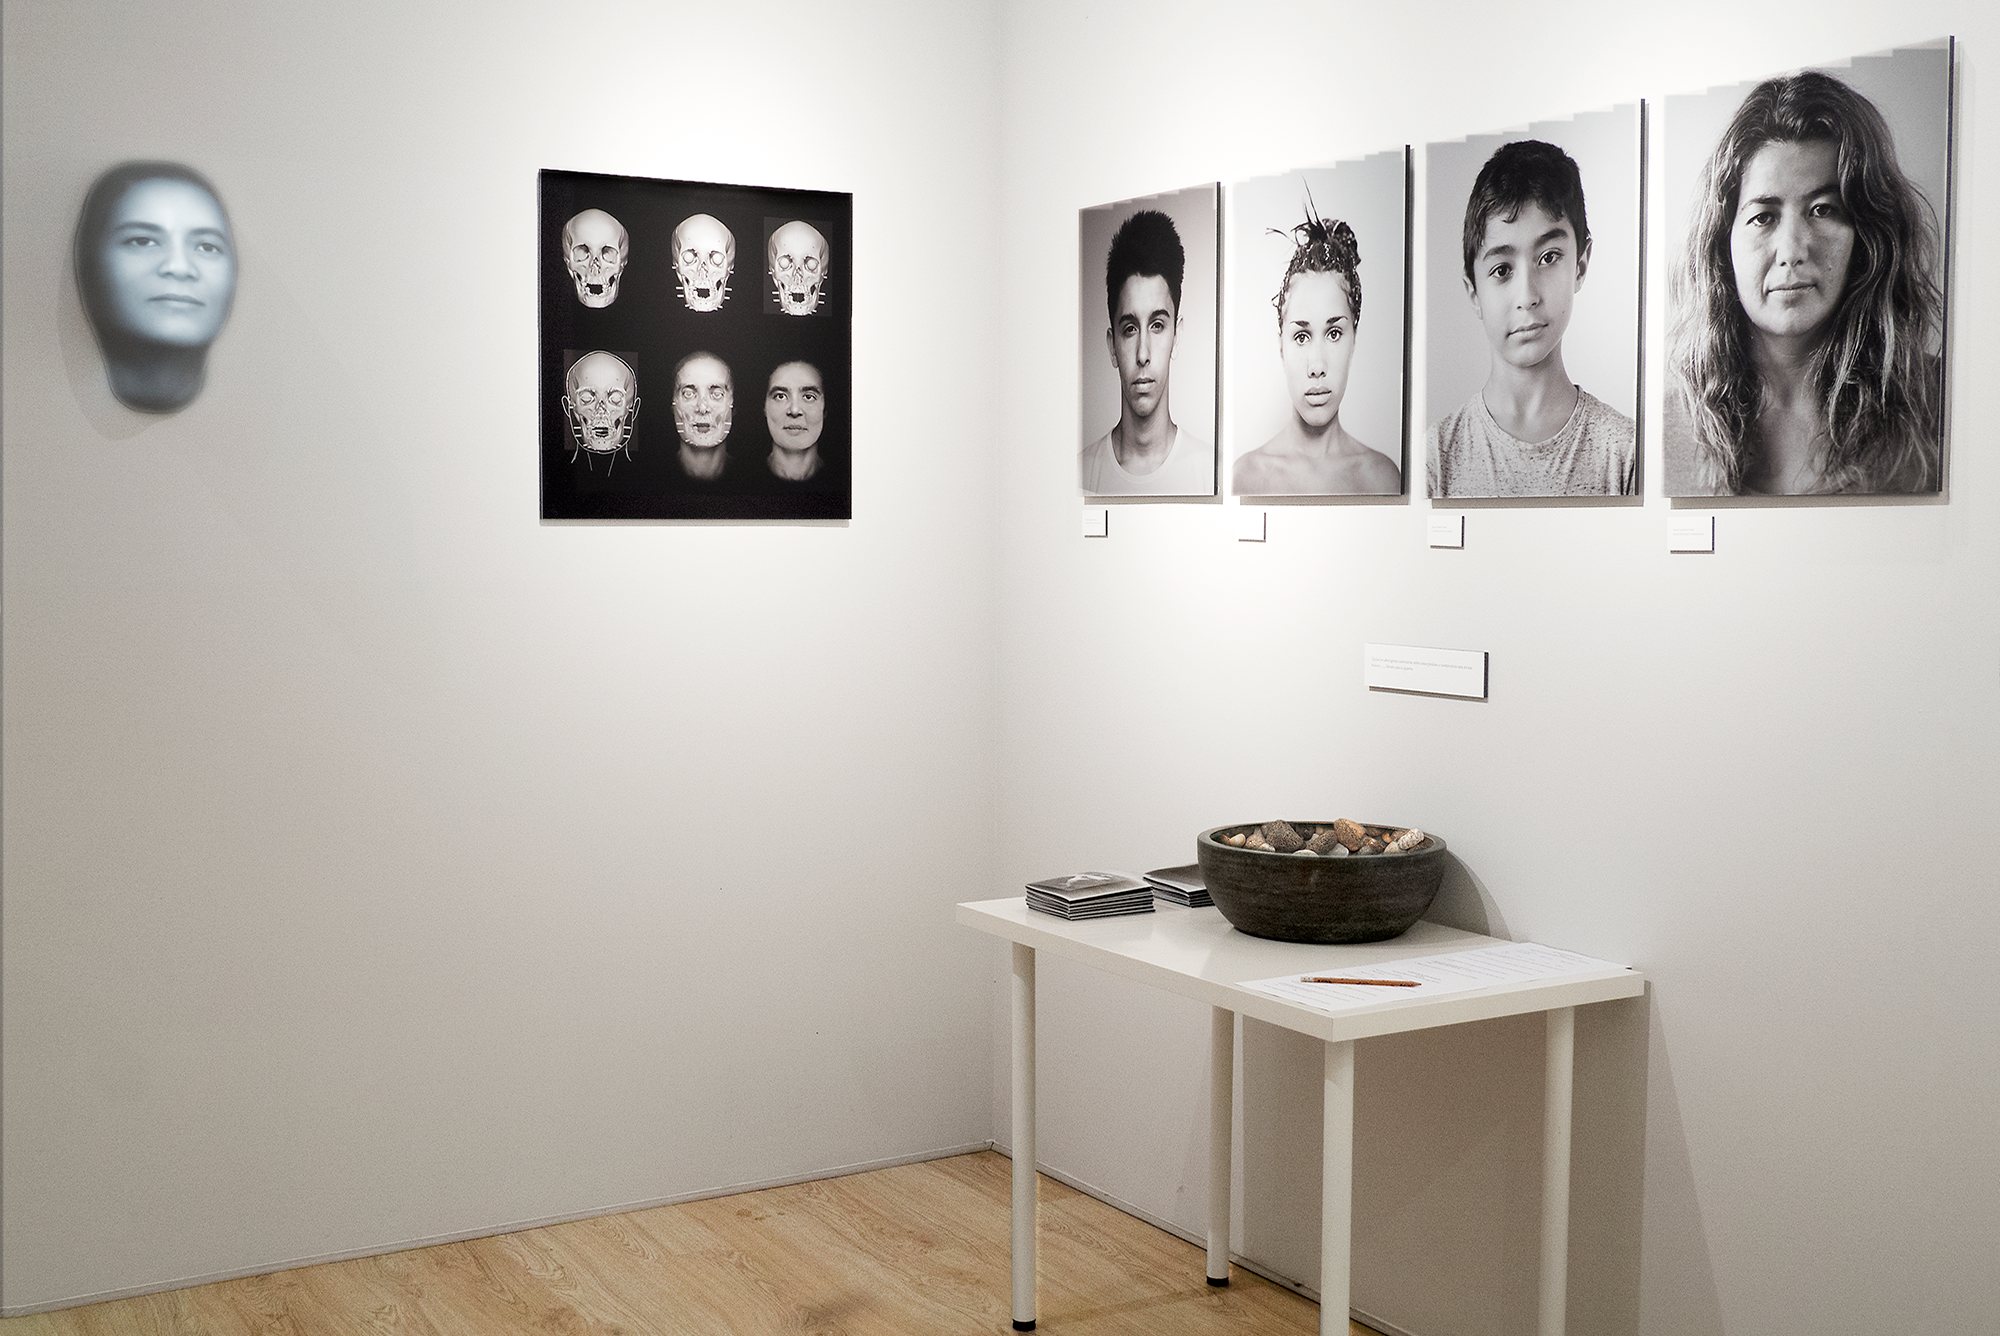 Produced and curated by Francesca Phillips, the exhibition The Quest for Ancestral Faces. (La búsqueda de caras ancestrales), Canary Islands